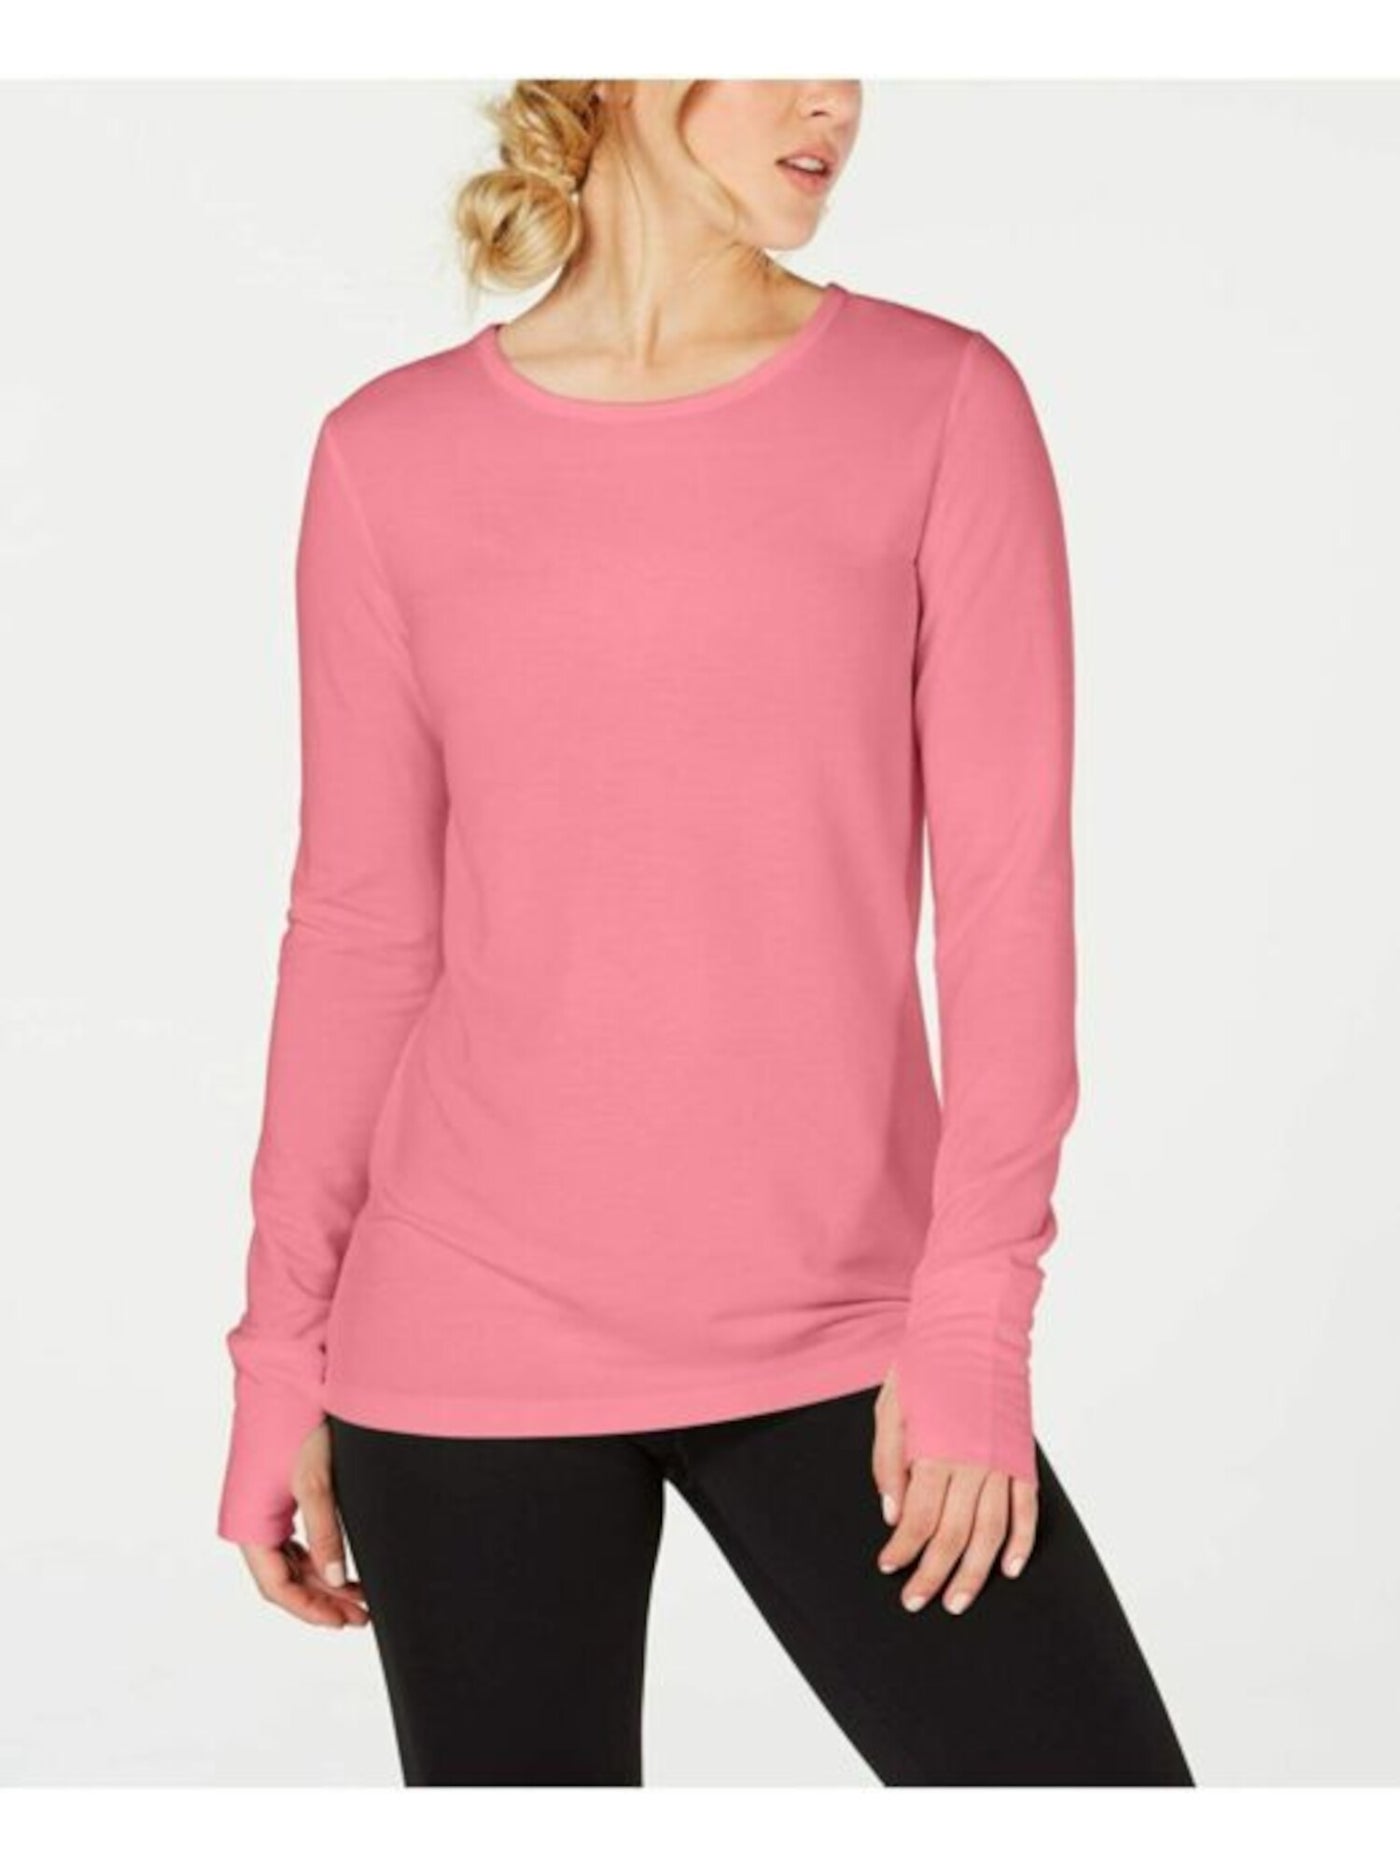 IDEOLOGY Womens Pink Long Sleeve Scoop Neck Top Size: M